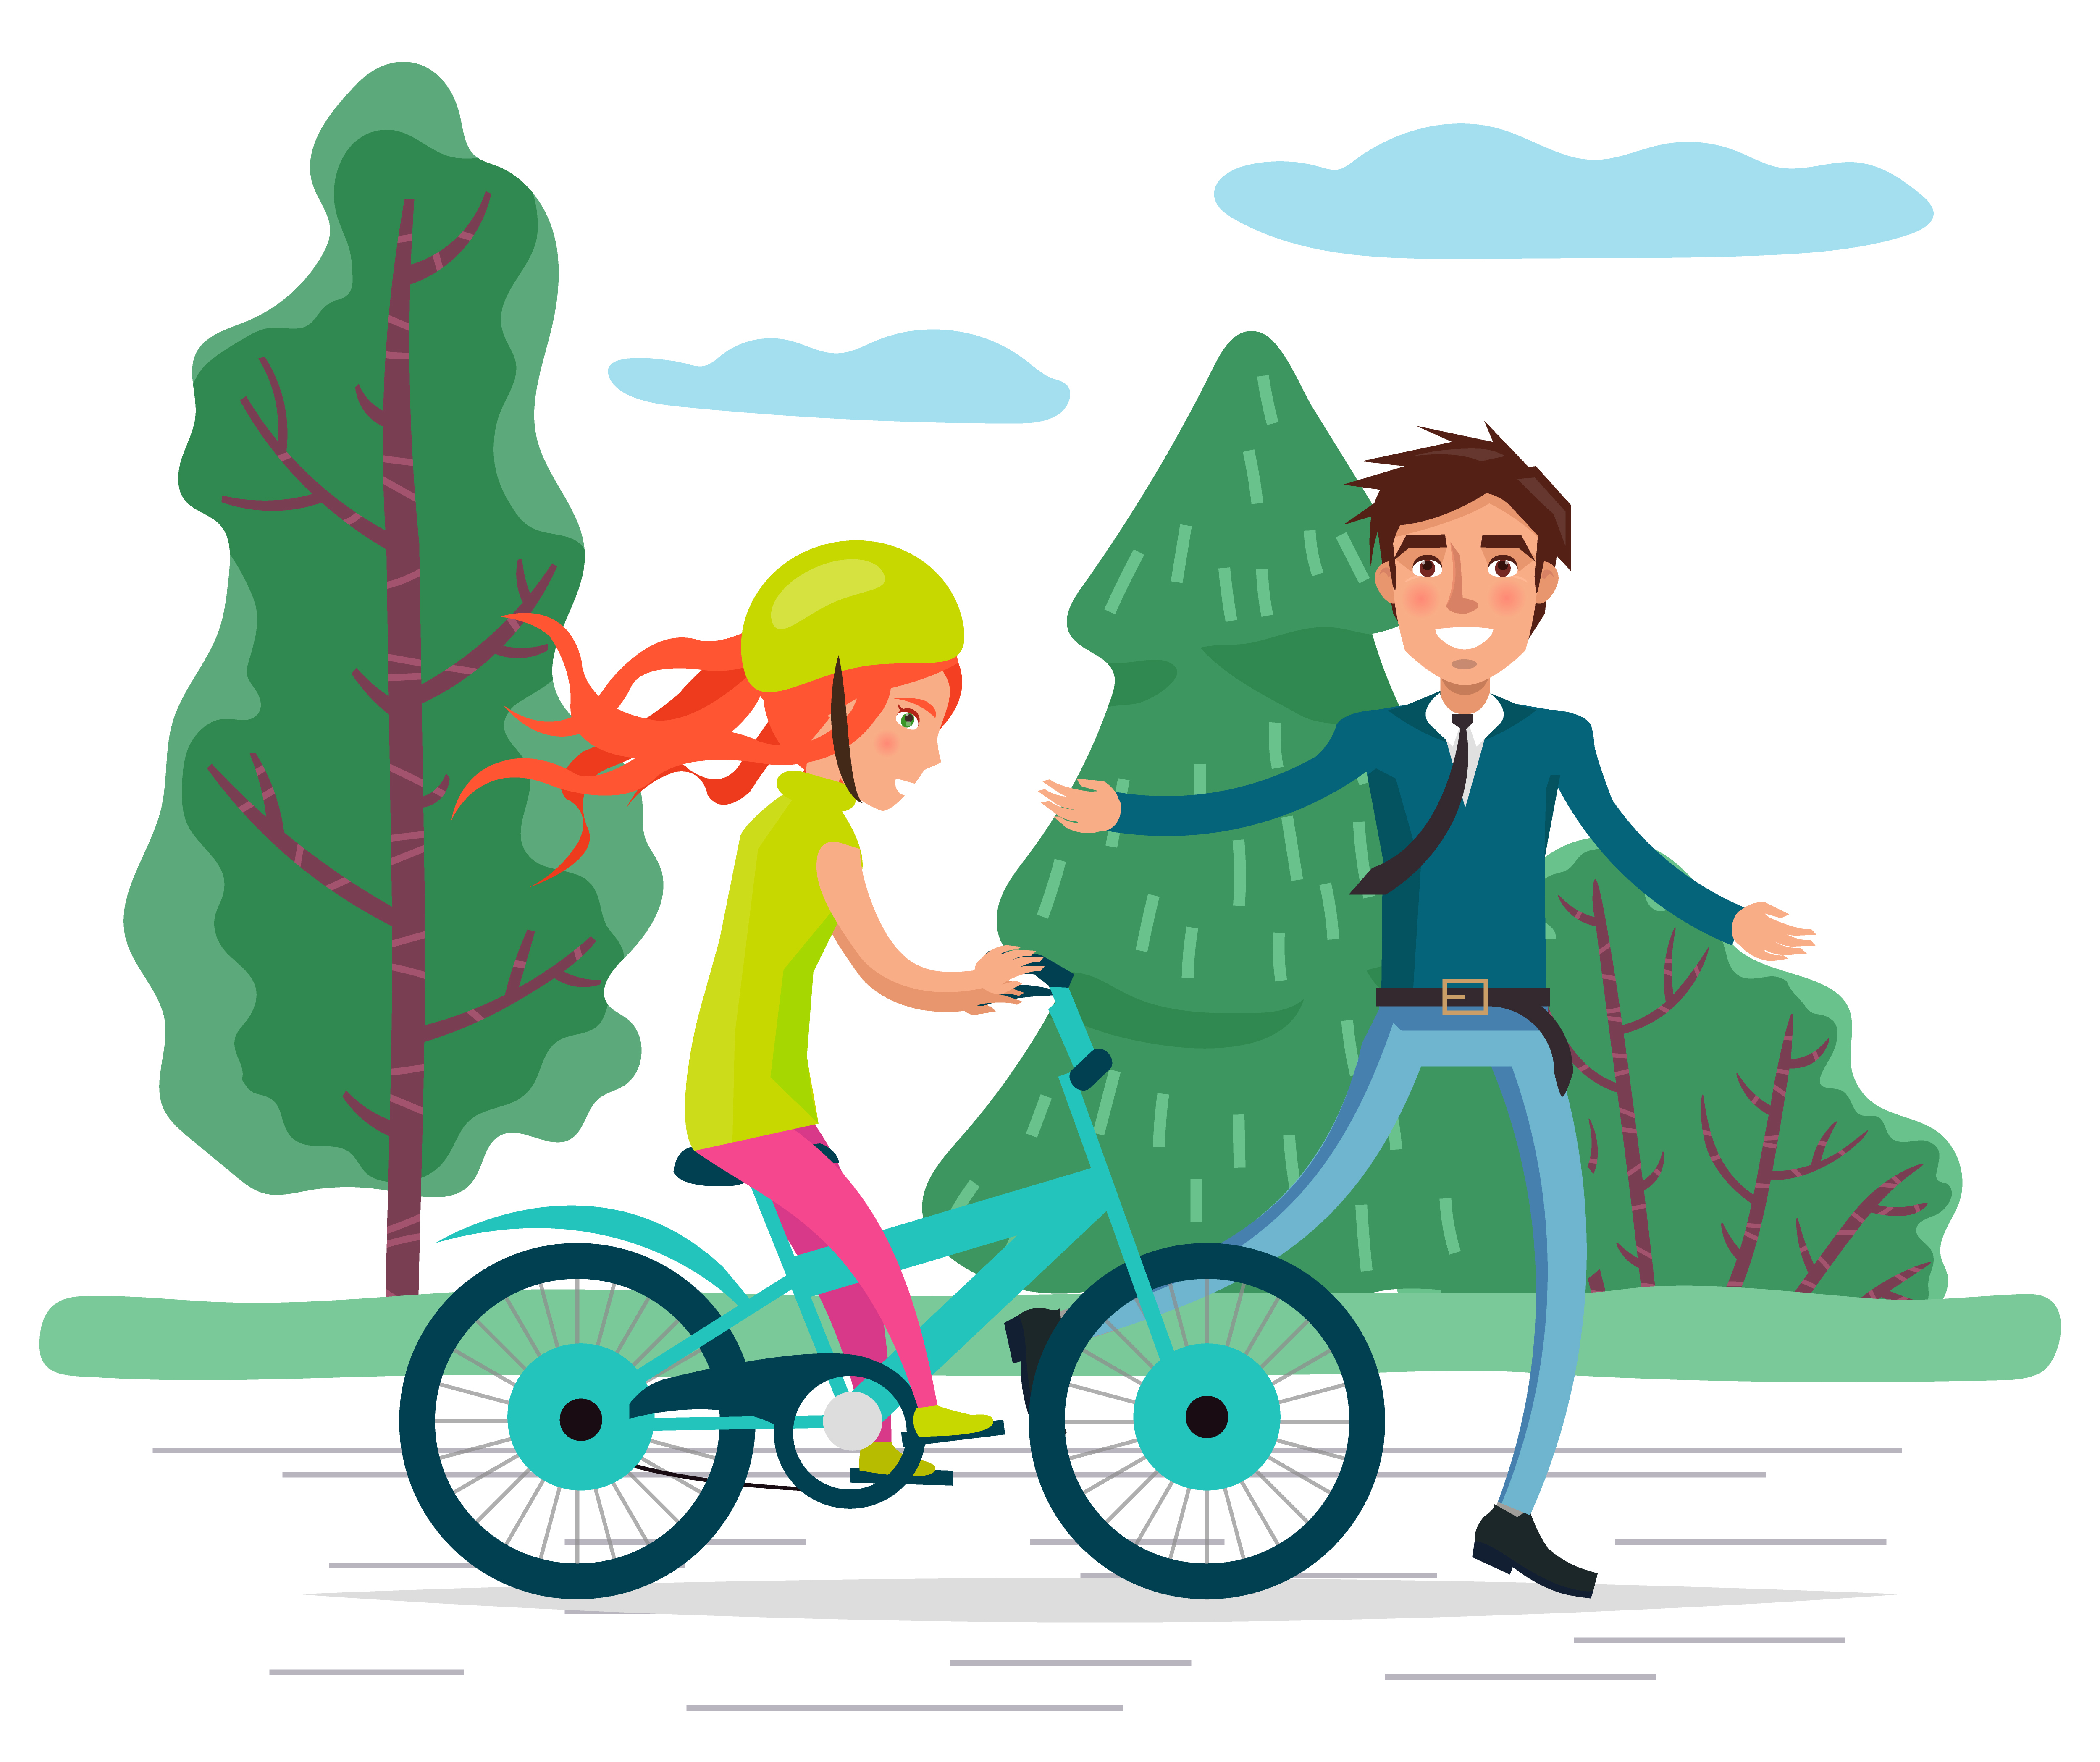 Smiling father teaching little daughter cycling in park. Activity of woman character wearing helmet riding bicycle with safety of dad. Adult and child learning driving together in green park vector. Family Activity Dad Teaching Girl Cycling Vector